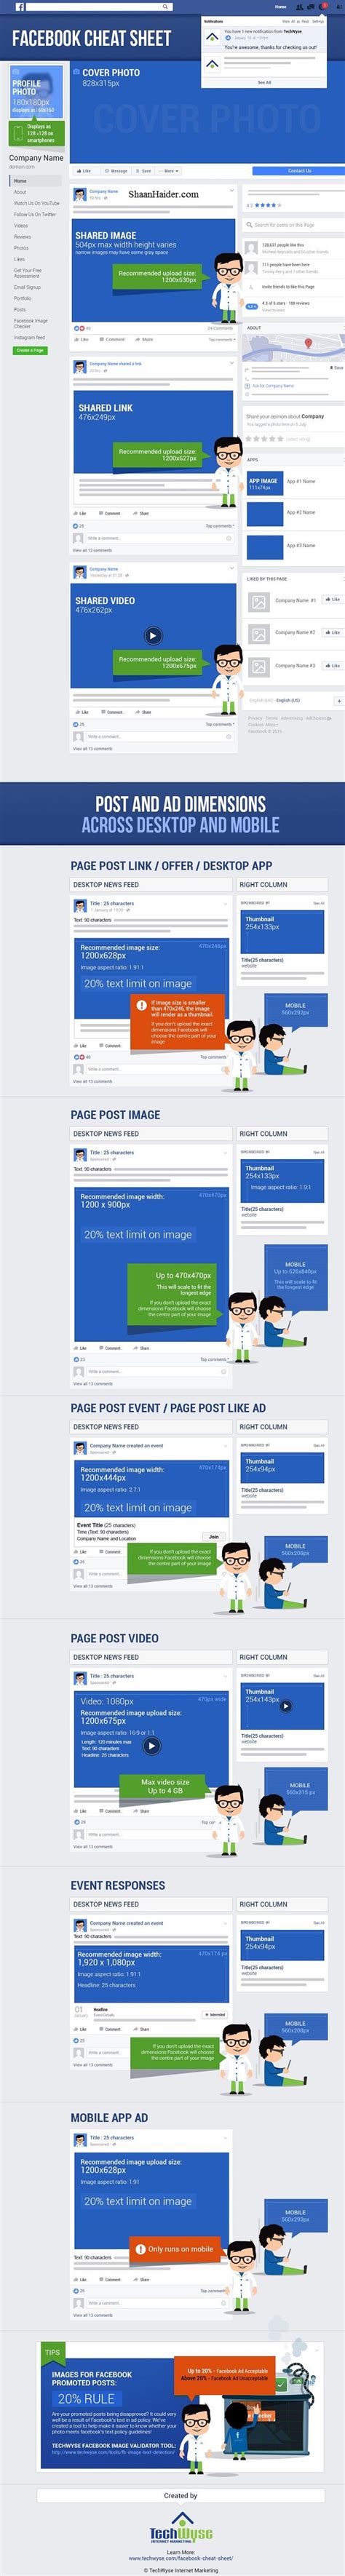 Facebook Cheat Sheet Facebook Sizes Dimensions Infographic Images